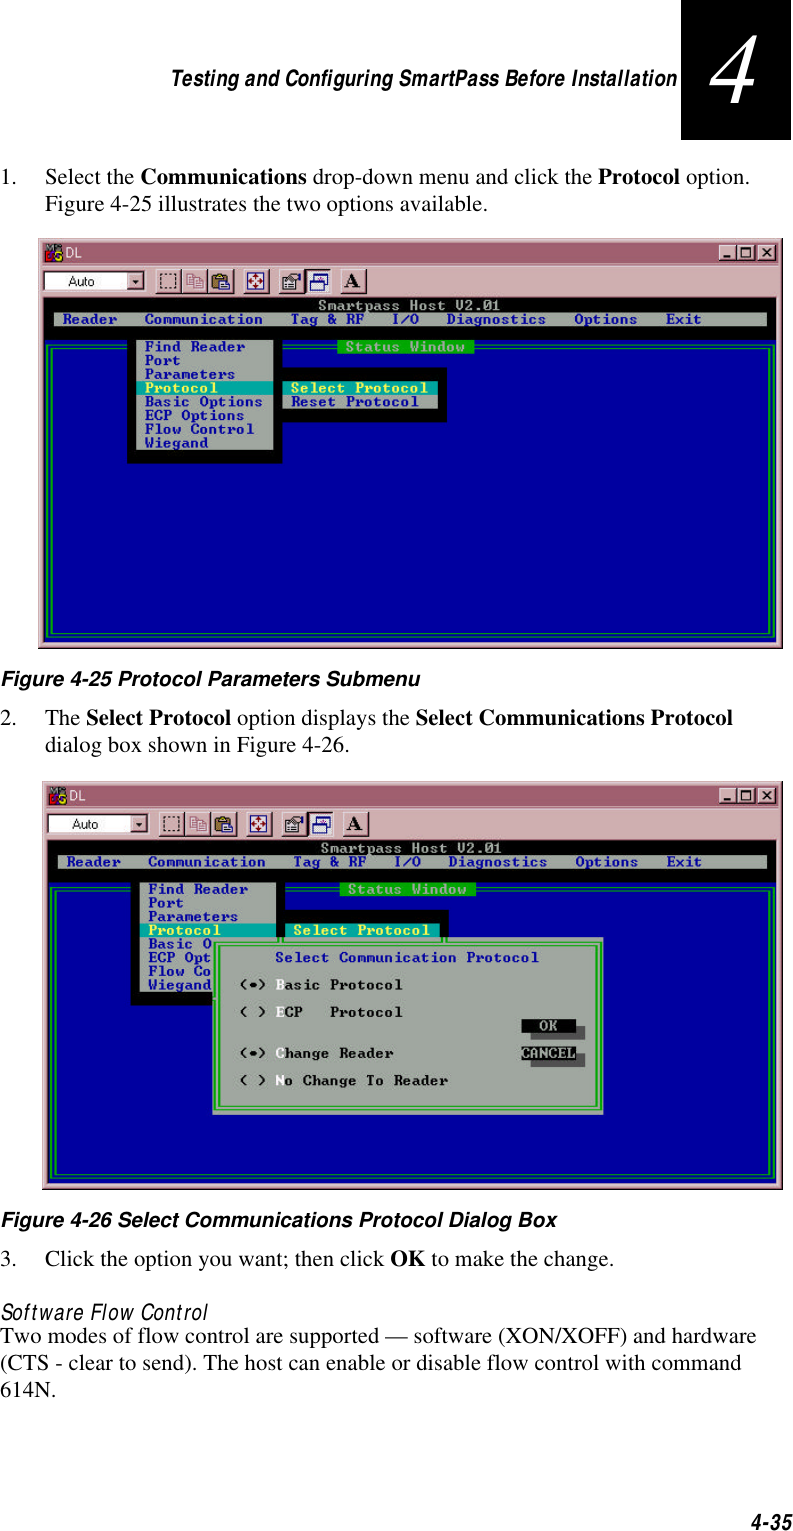 Testing and Configuring SmartPass Before Installation4-3541. Select the Communications drop-down menu and click the Protocol option. Figure 4-25 illustrates the two options available.    Figure 4-25 Protocol Parameters Submenu 2. The Select Protocol option displays the Select Communications Protocol dialog box shown in Figure 4-26. Figure 4-26 Select Communications Protocol Dialog Box3. Click the option you want; then click OK to make the change. Software Flow ControlTwo modes of flow control are supported — software (XON/XOFF) and hardware (CTS - clear to send). The host can enable or disable flow control with command 614N.